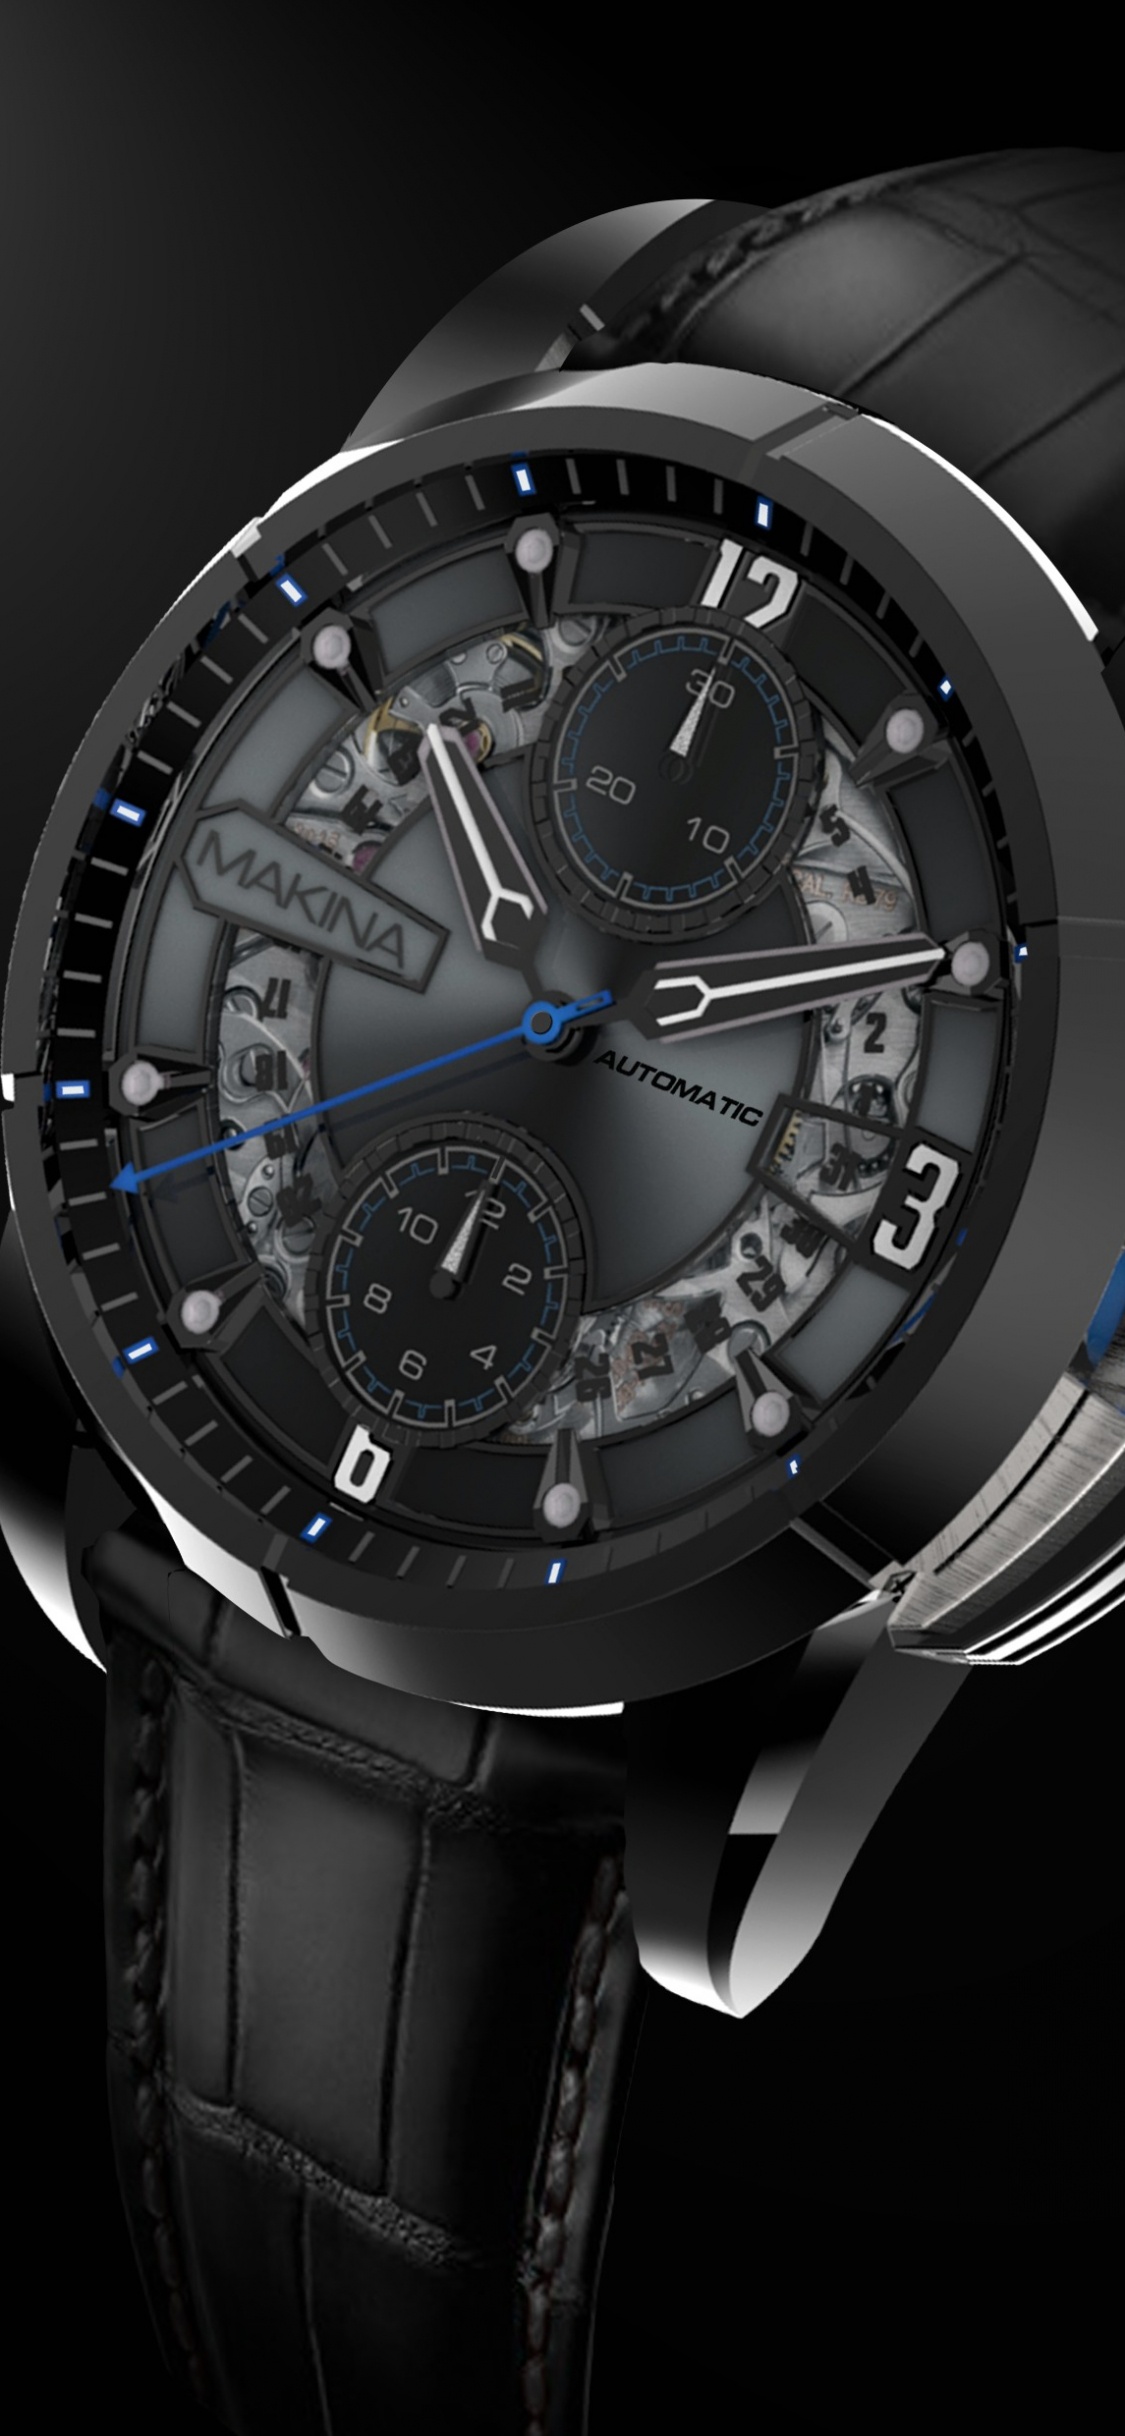 Silver and Blue Chronograph Watch. Wallpaper in 1125x2436 Resolution